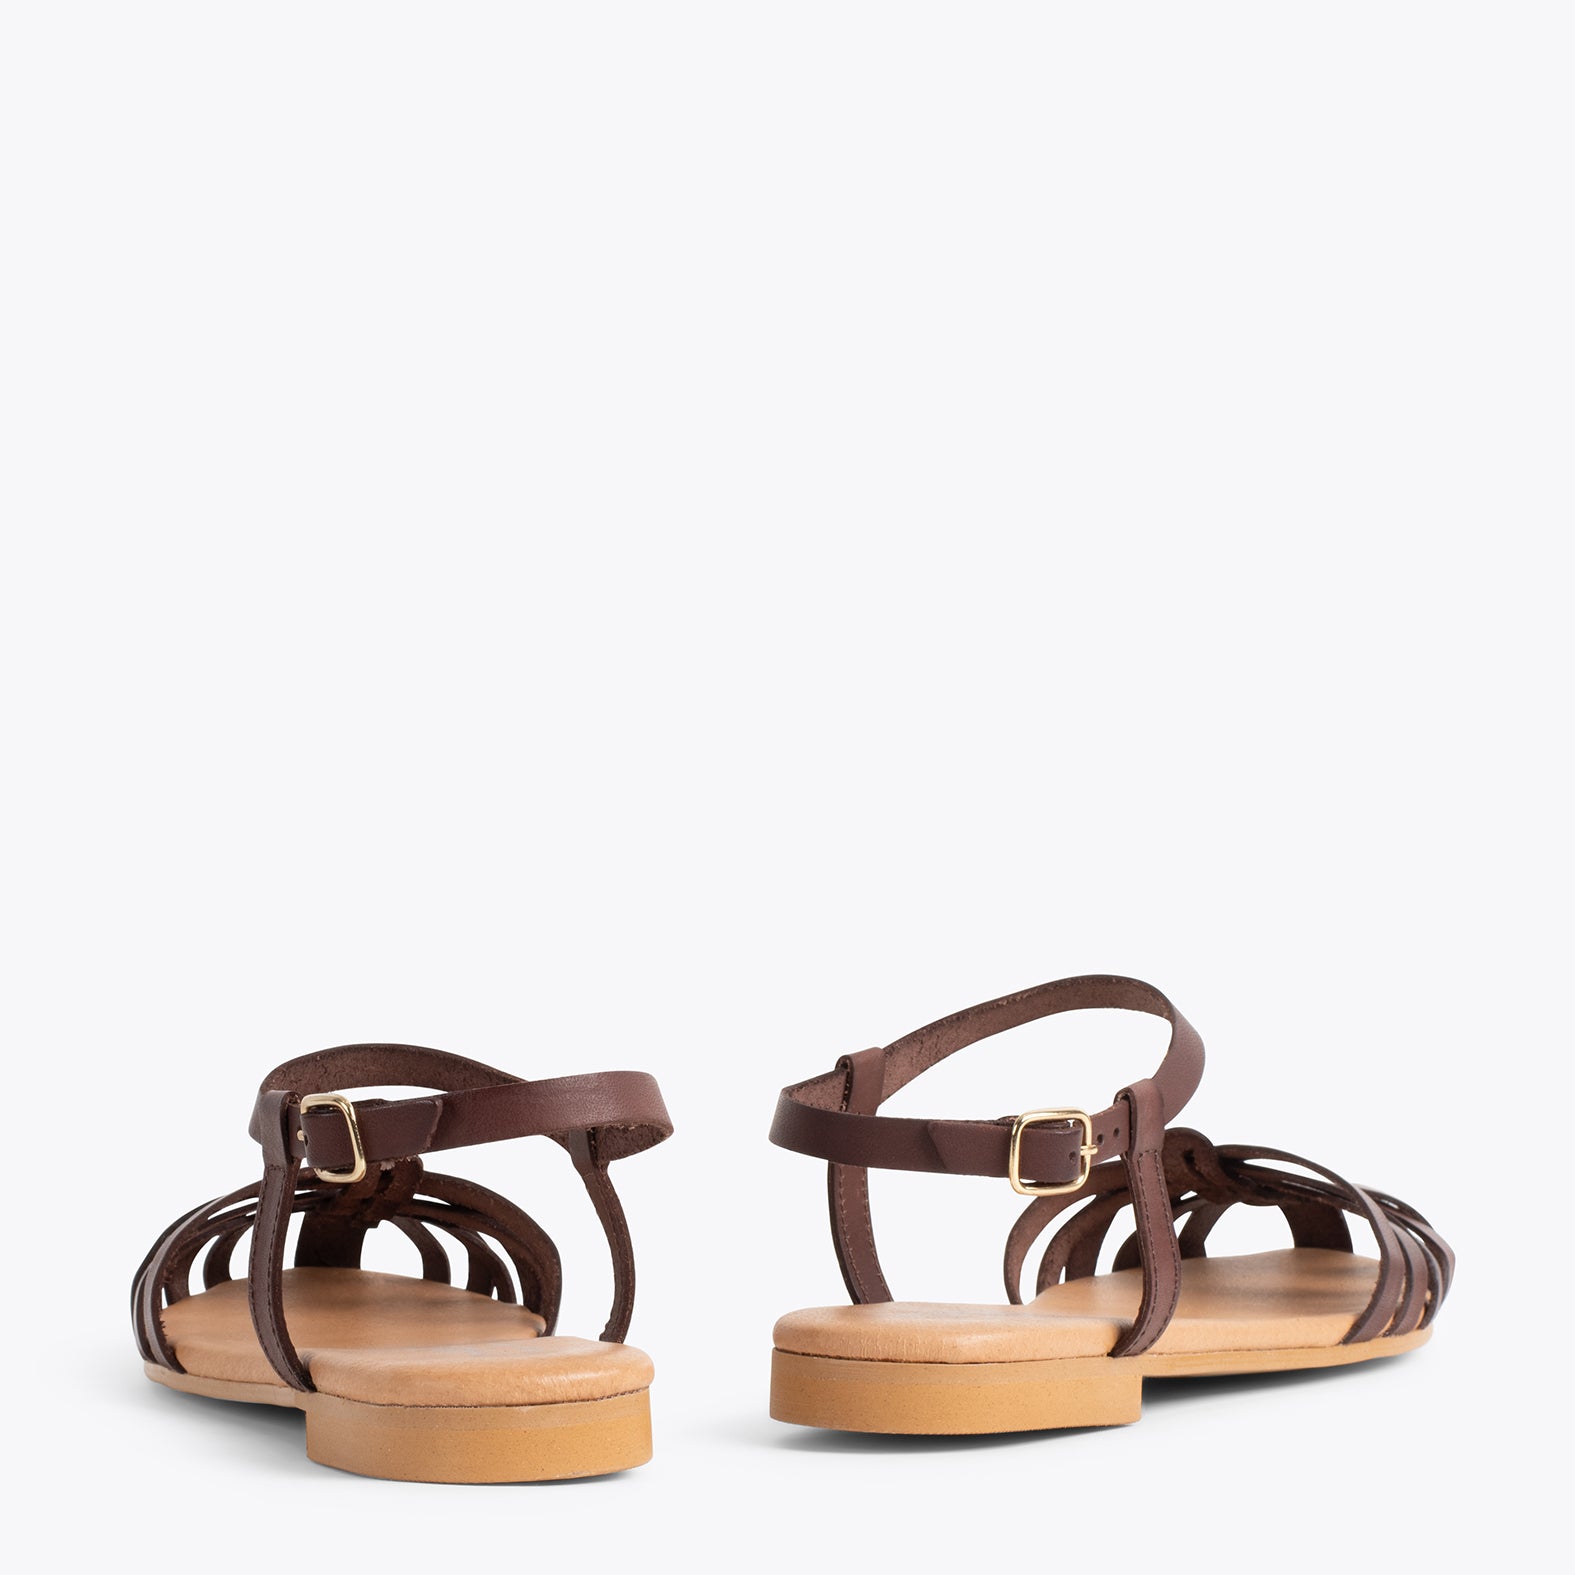 BEACH - BROWN sandal with straps